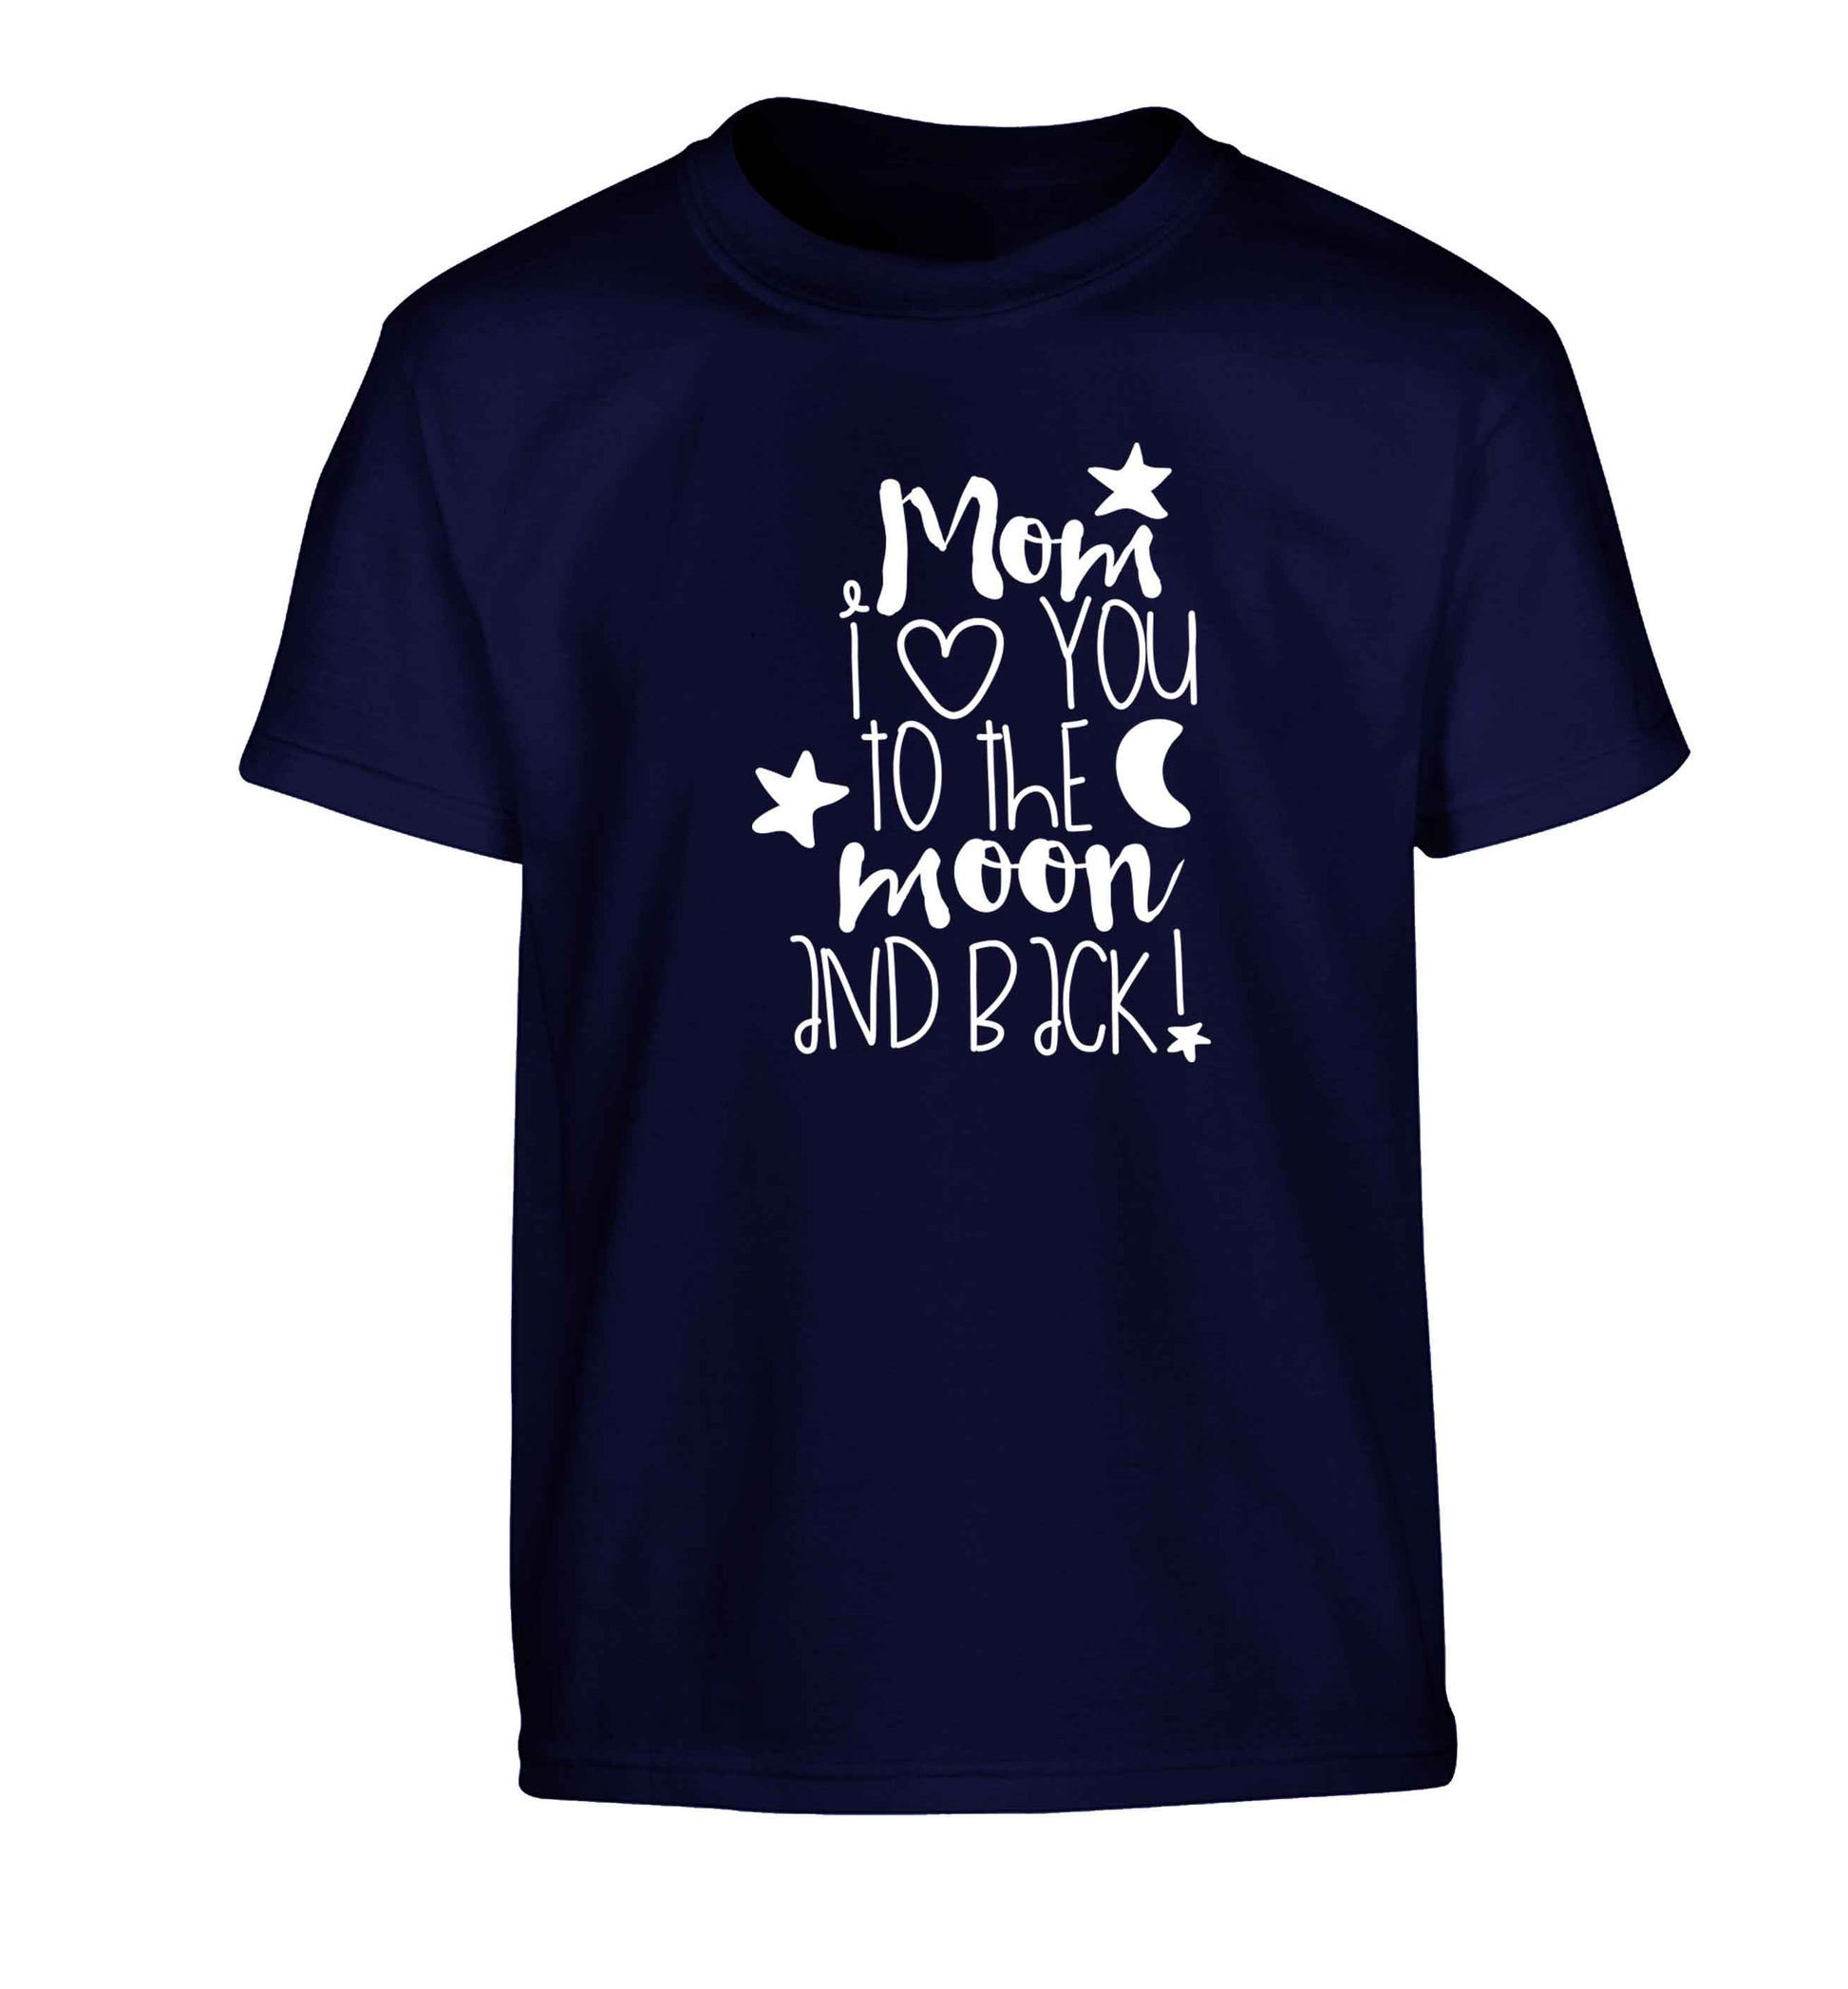 Mom I love you to the moon and back Children's navy Tshirt 12-13 Years